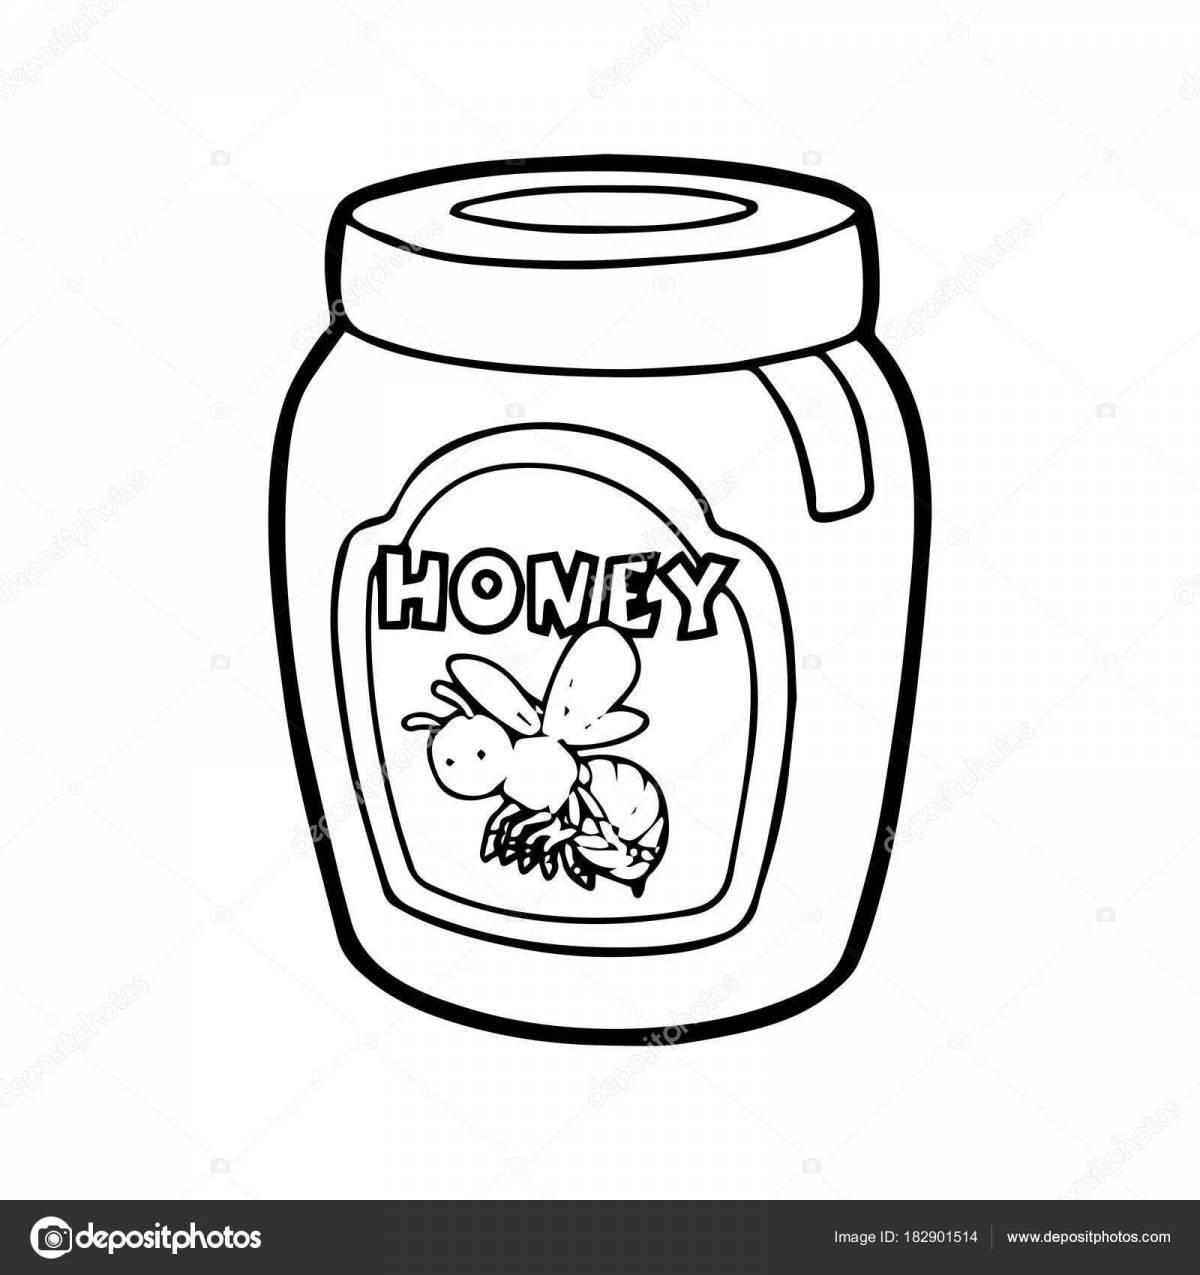 Great honey coloring book for kids